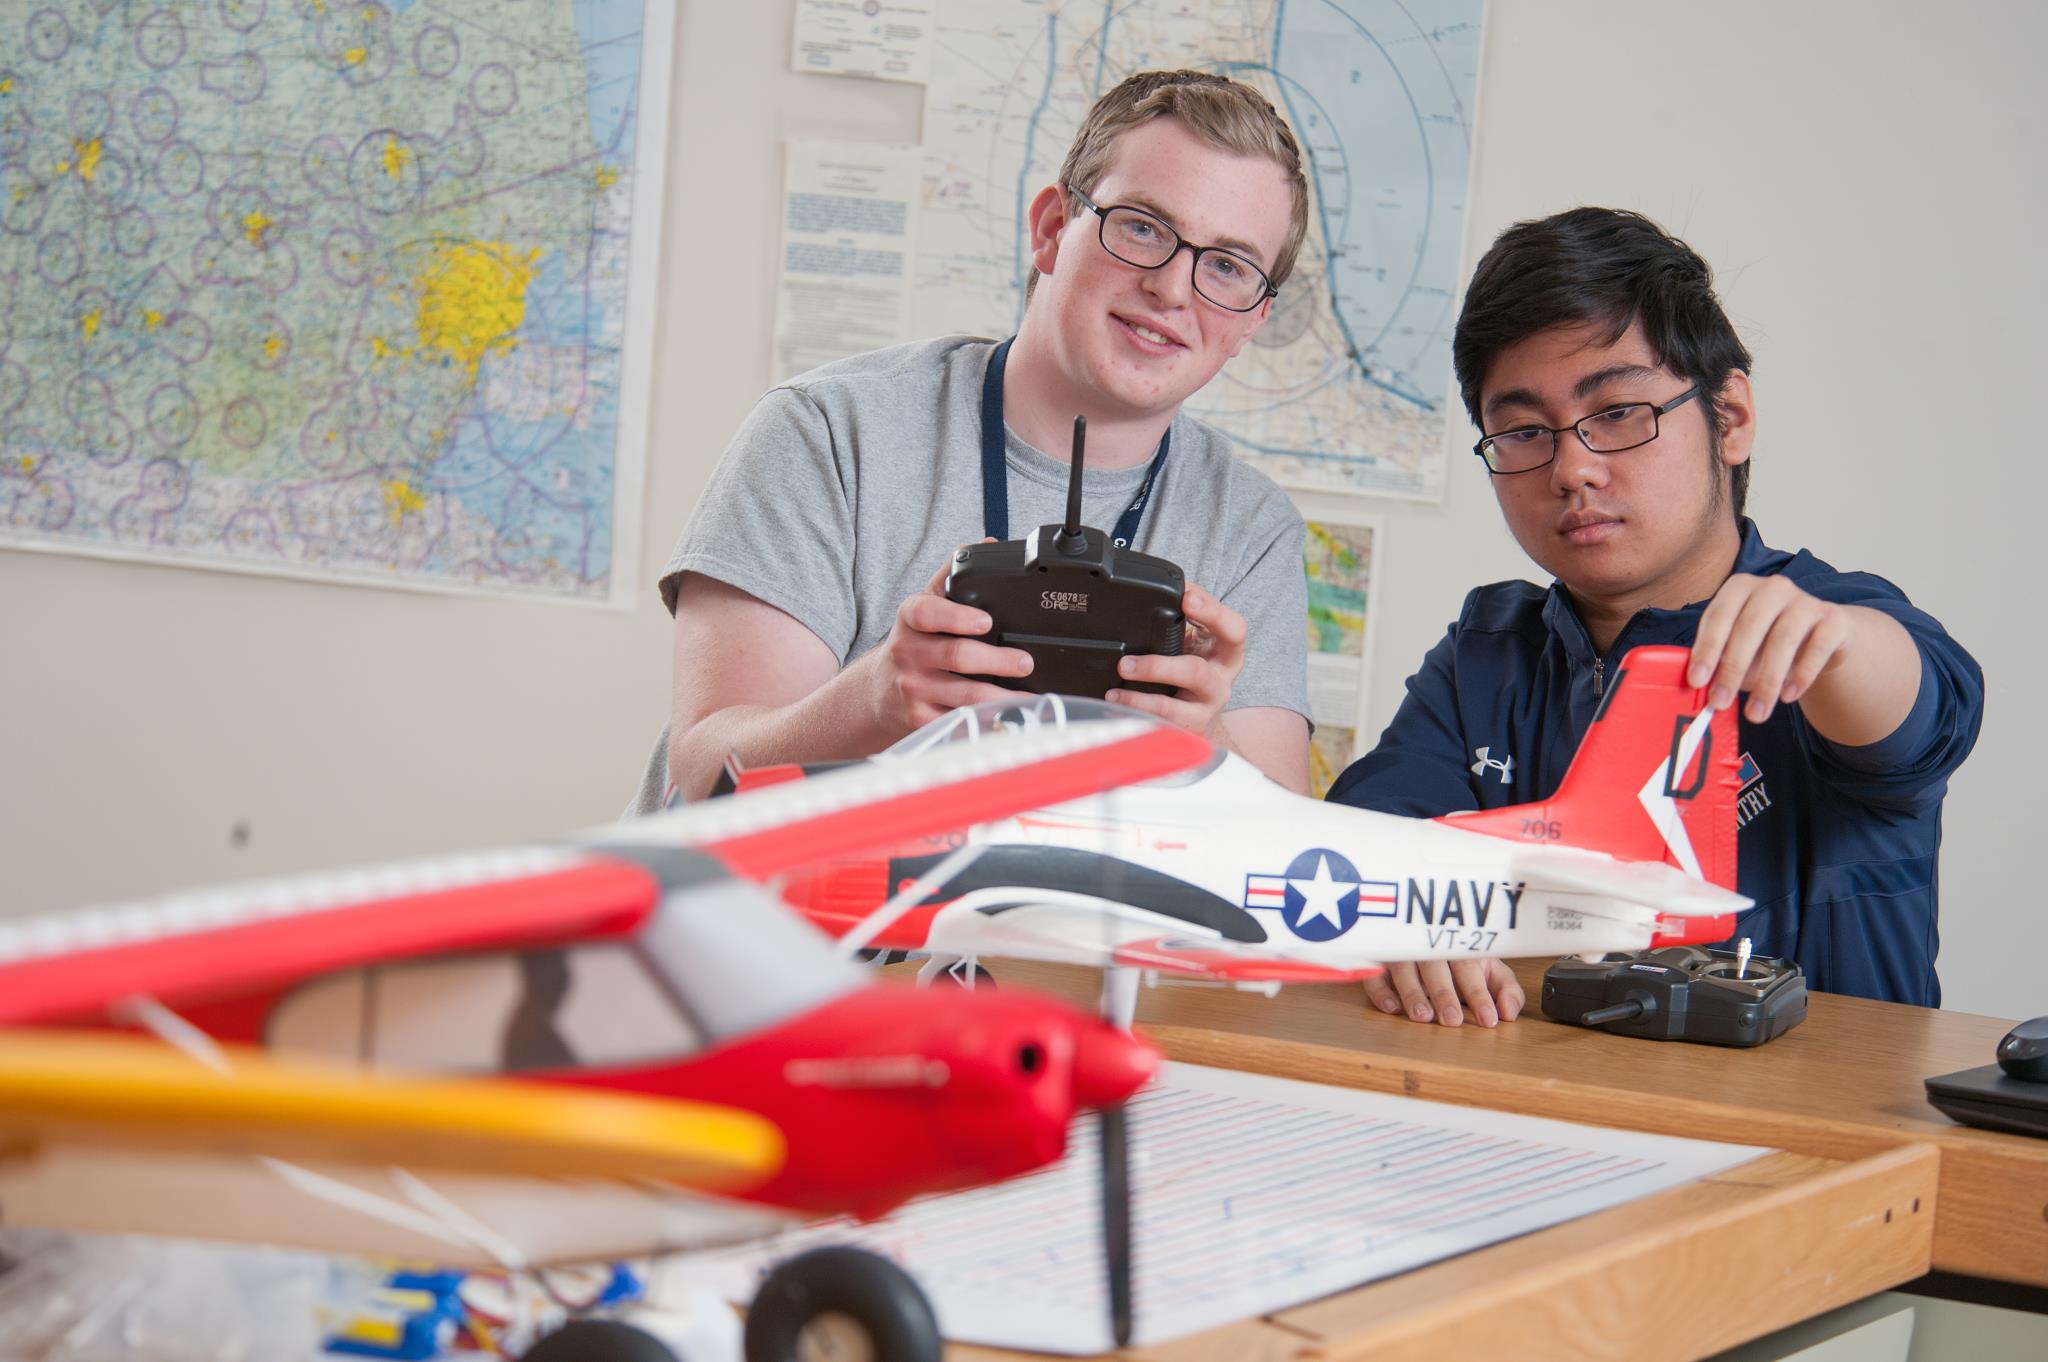 Two Aviation students prepare a model airplane for flight.